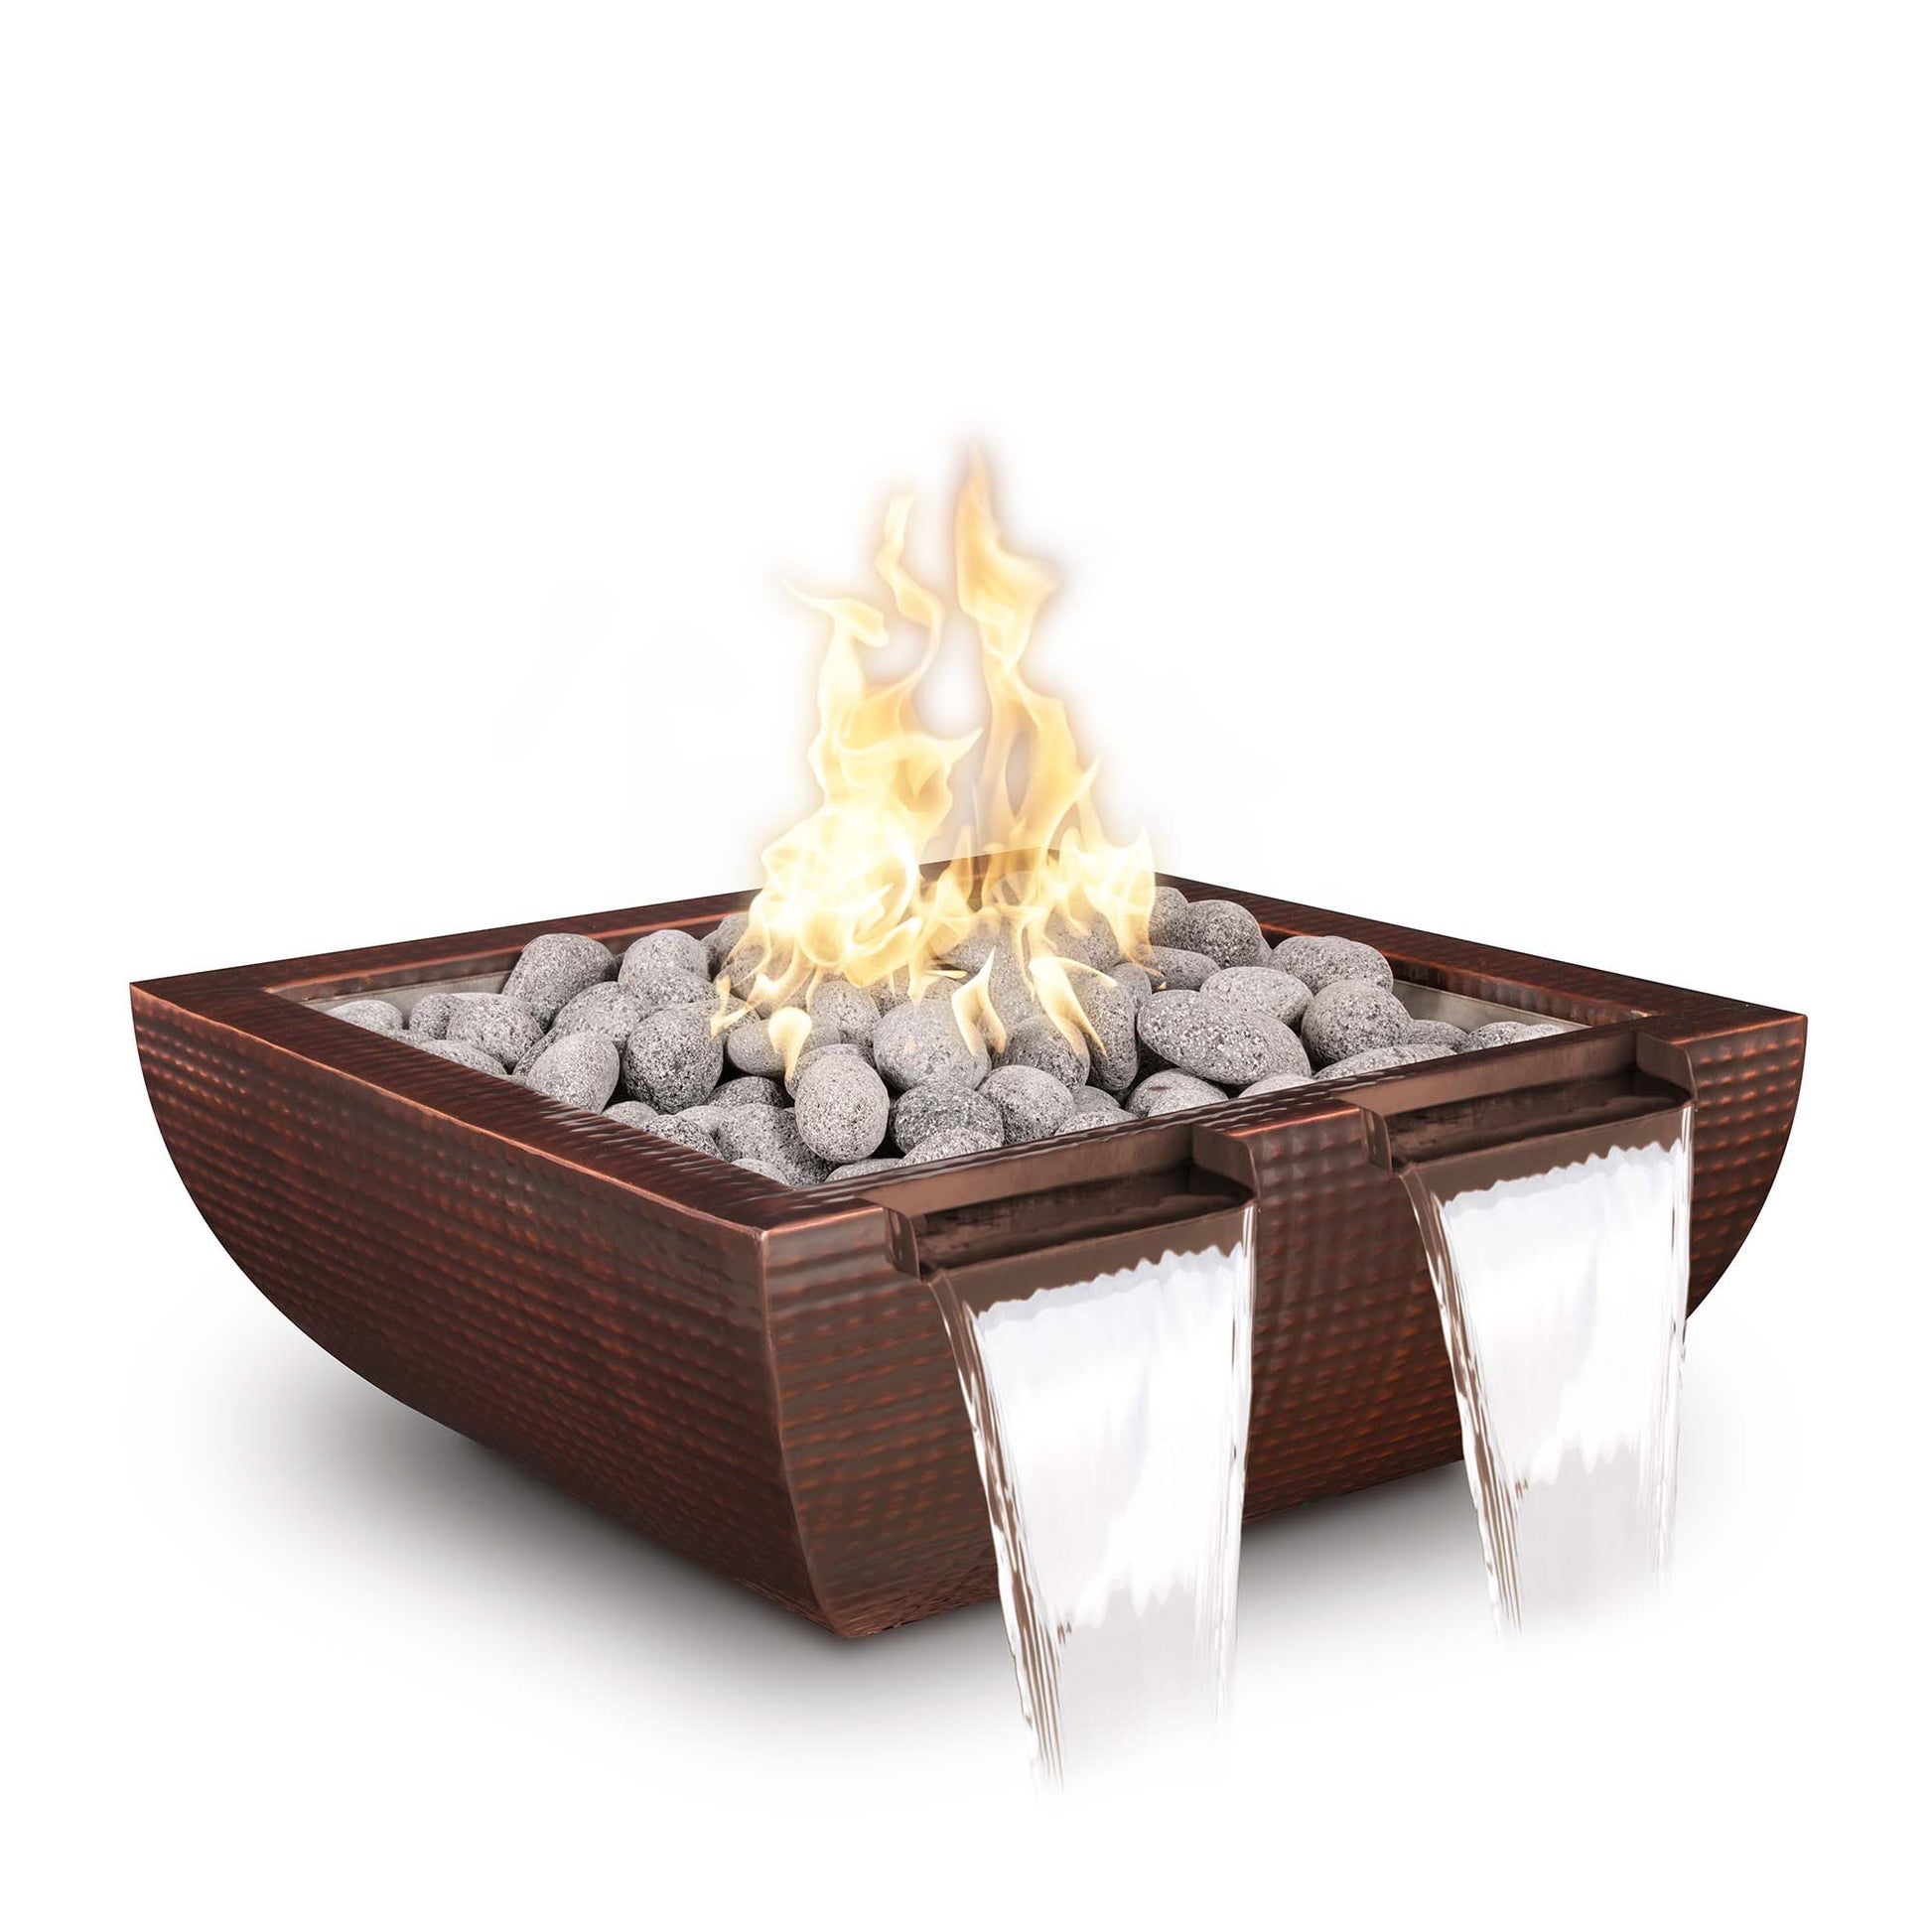 The Outdoor Plus Avalon Twin Spill 24" White Powder Coated Metal Liquid Propane Fire & Water Bowl with Match Lit with Flame Sense Ignition